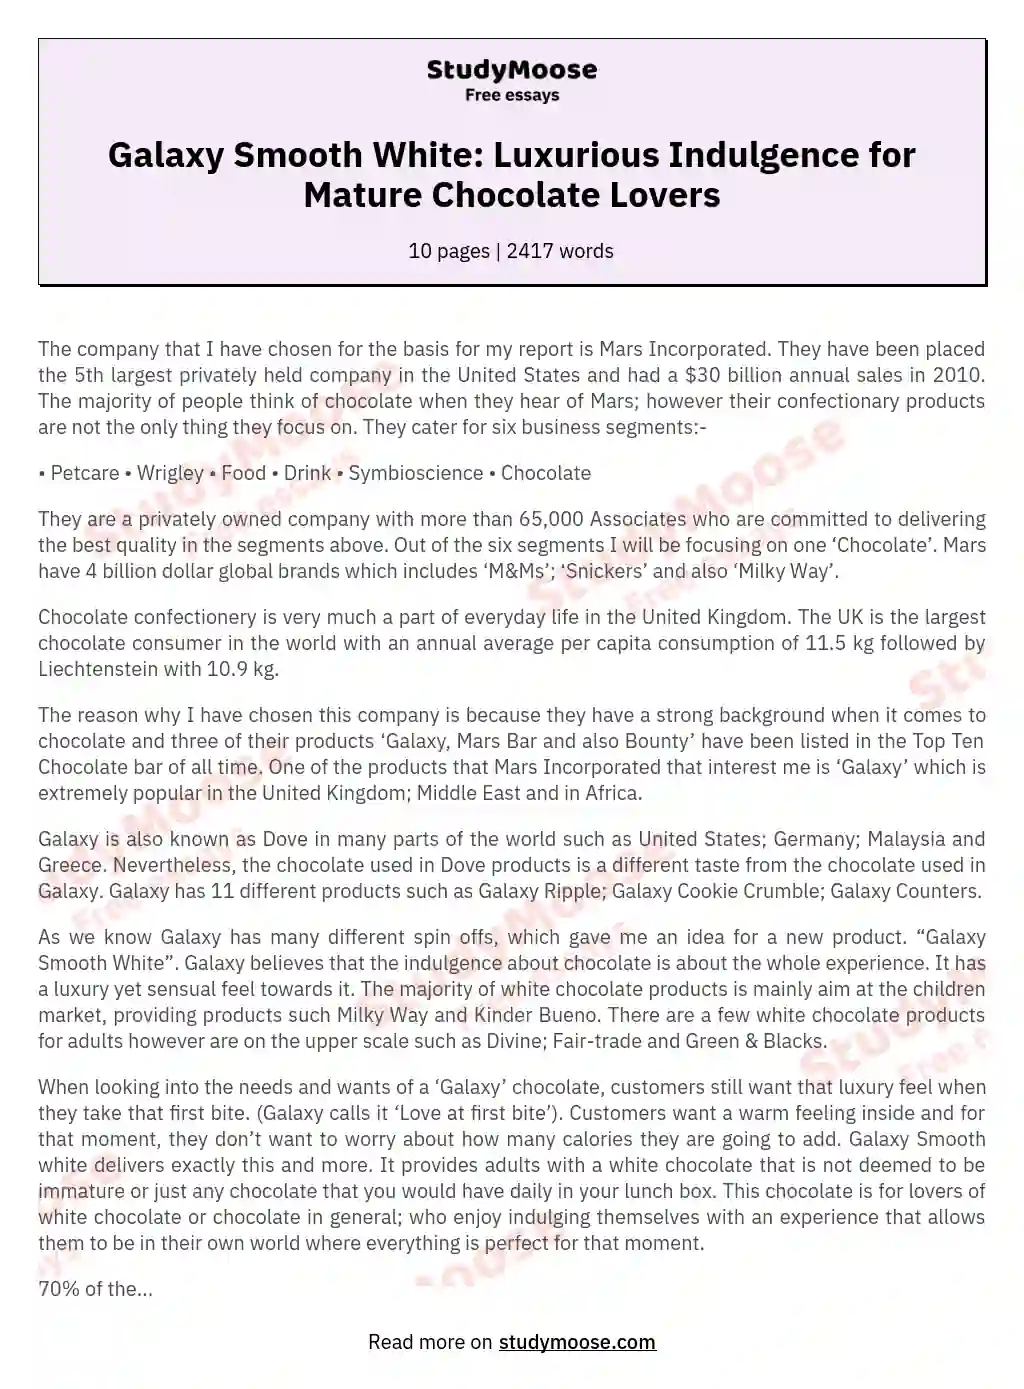 Galaxy Smooth White: Luxurious Indulgence for Mature Chocolate Lovers essay